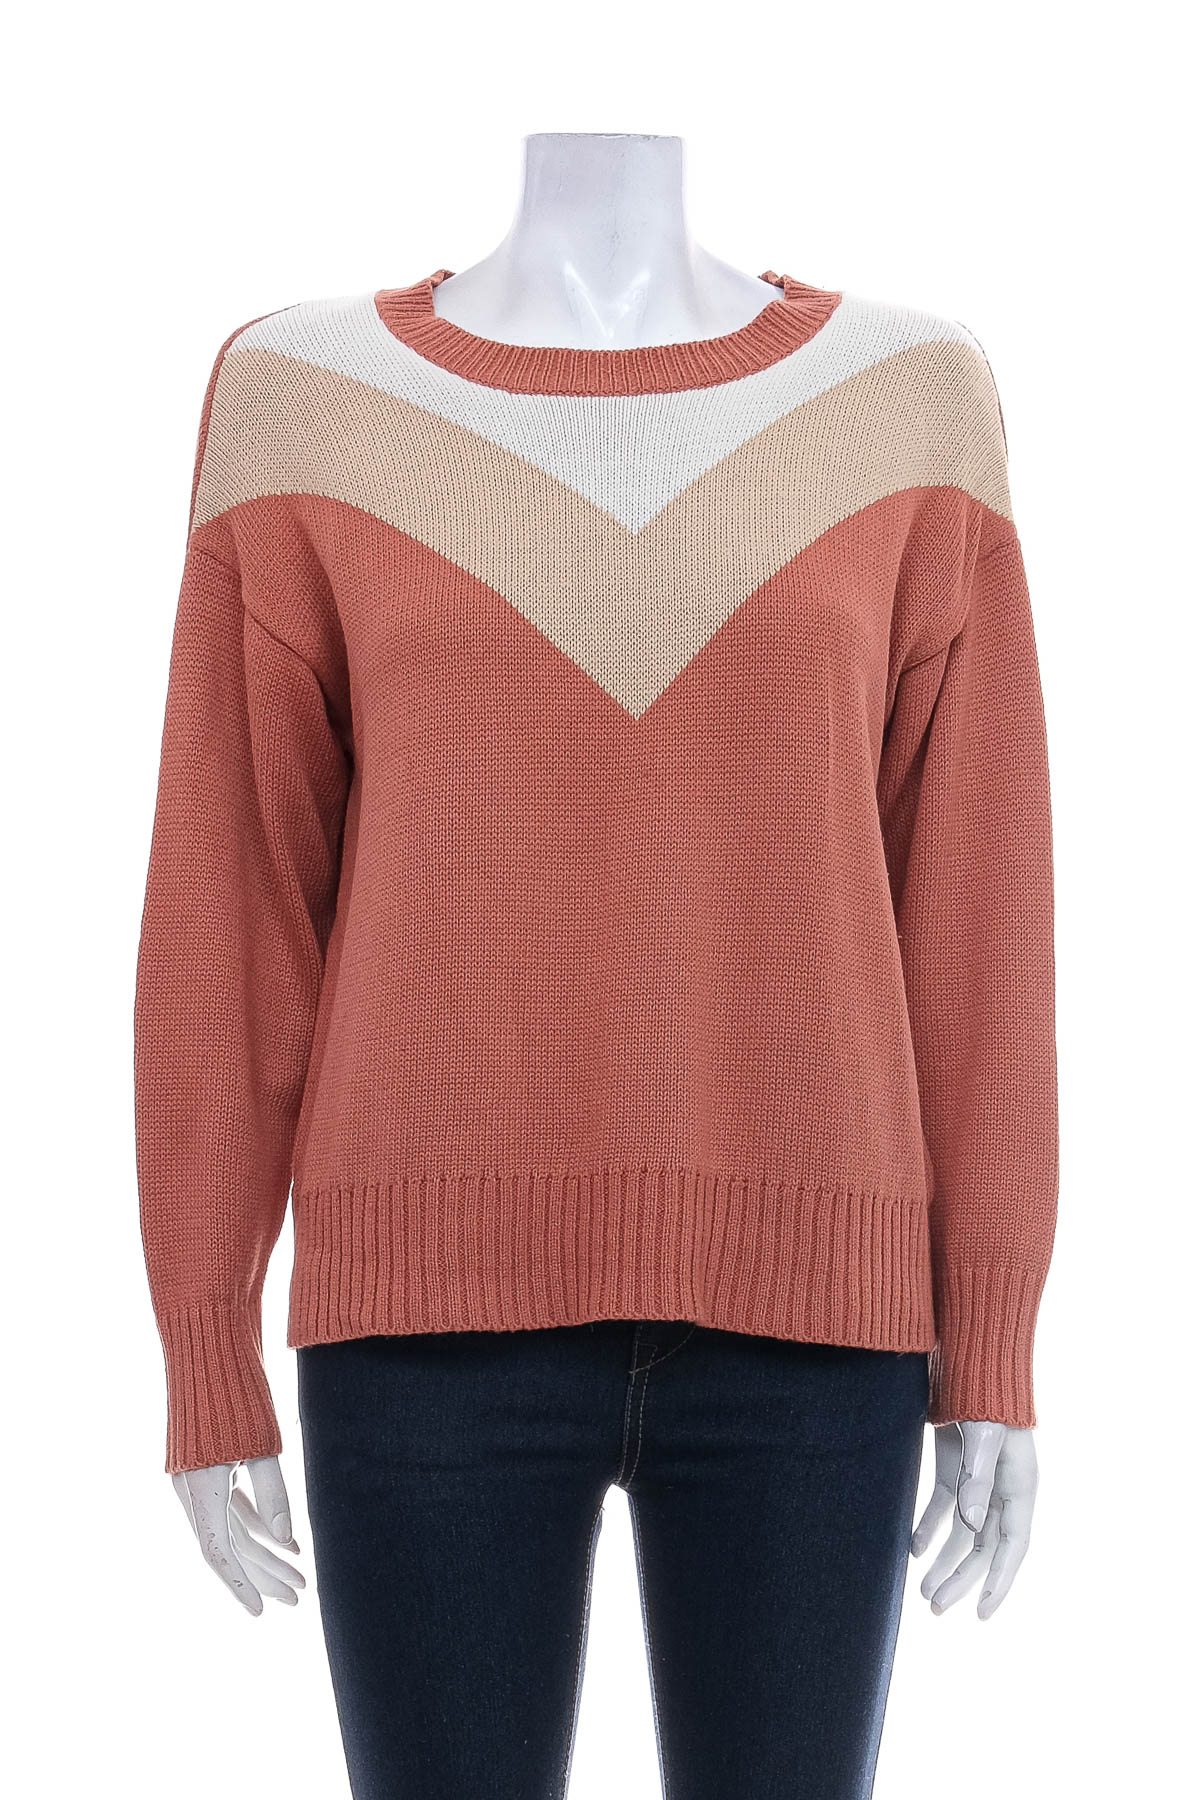 Women's sweater - All about eve. - 0